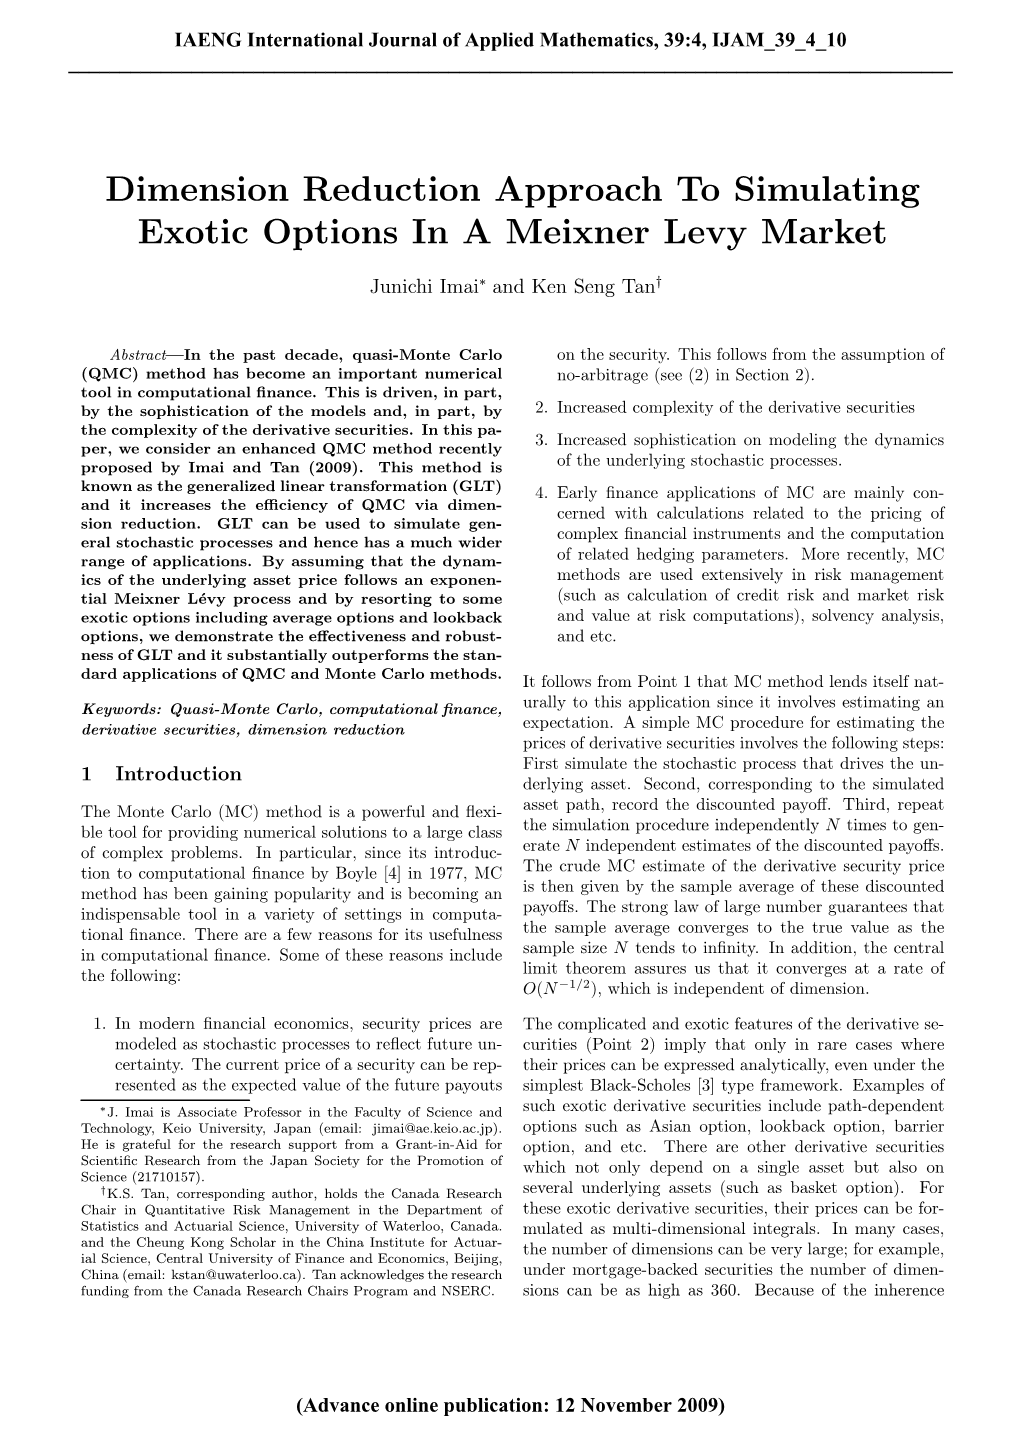 Dimension Reduction Approach to Simulating Exotic Options in a Meixner Levy Market